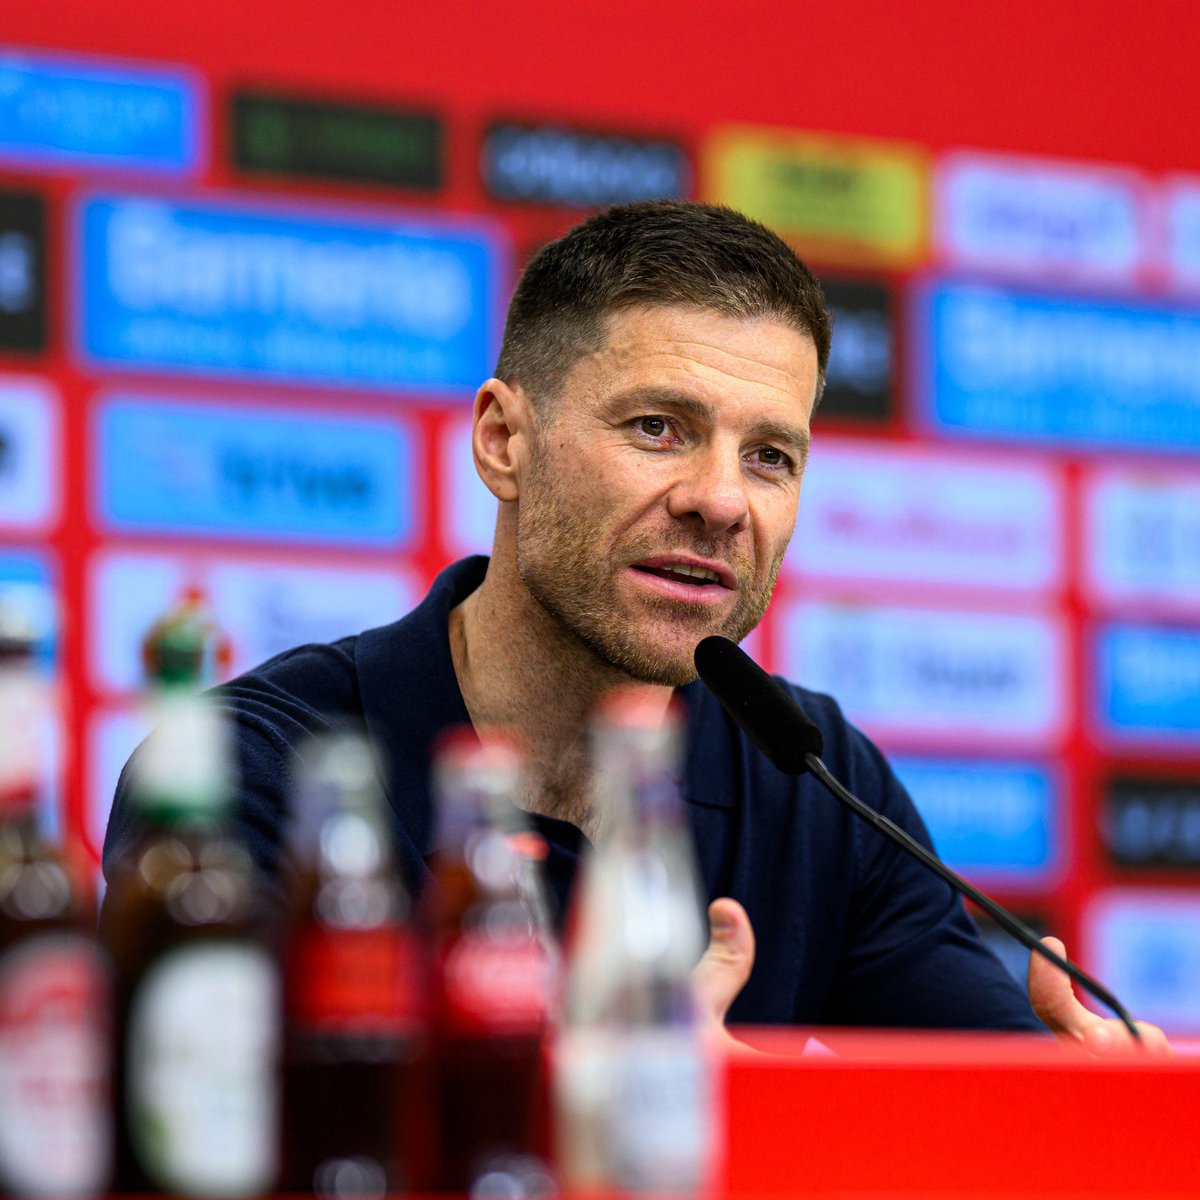 🗯️@XabiAlonso: 'The fans can celebrate today. We'll enjoy it and then recover tomorrow. It's an important day for the club and it's totally deserved to become champions undefeated. Unbelievable! We'll need some time to let that sink in.'

#DeutscherMeisterSVB #Winnerkusen